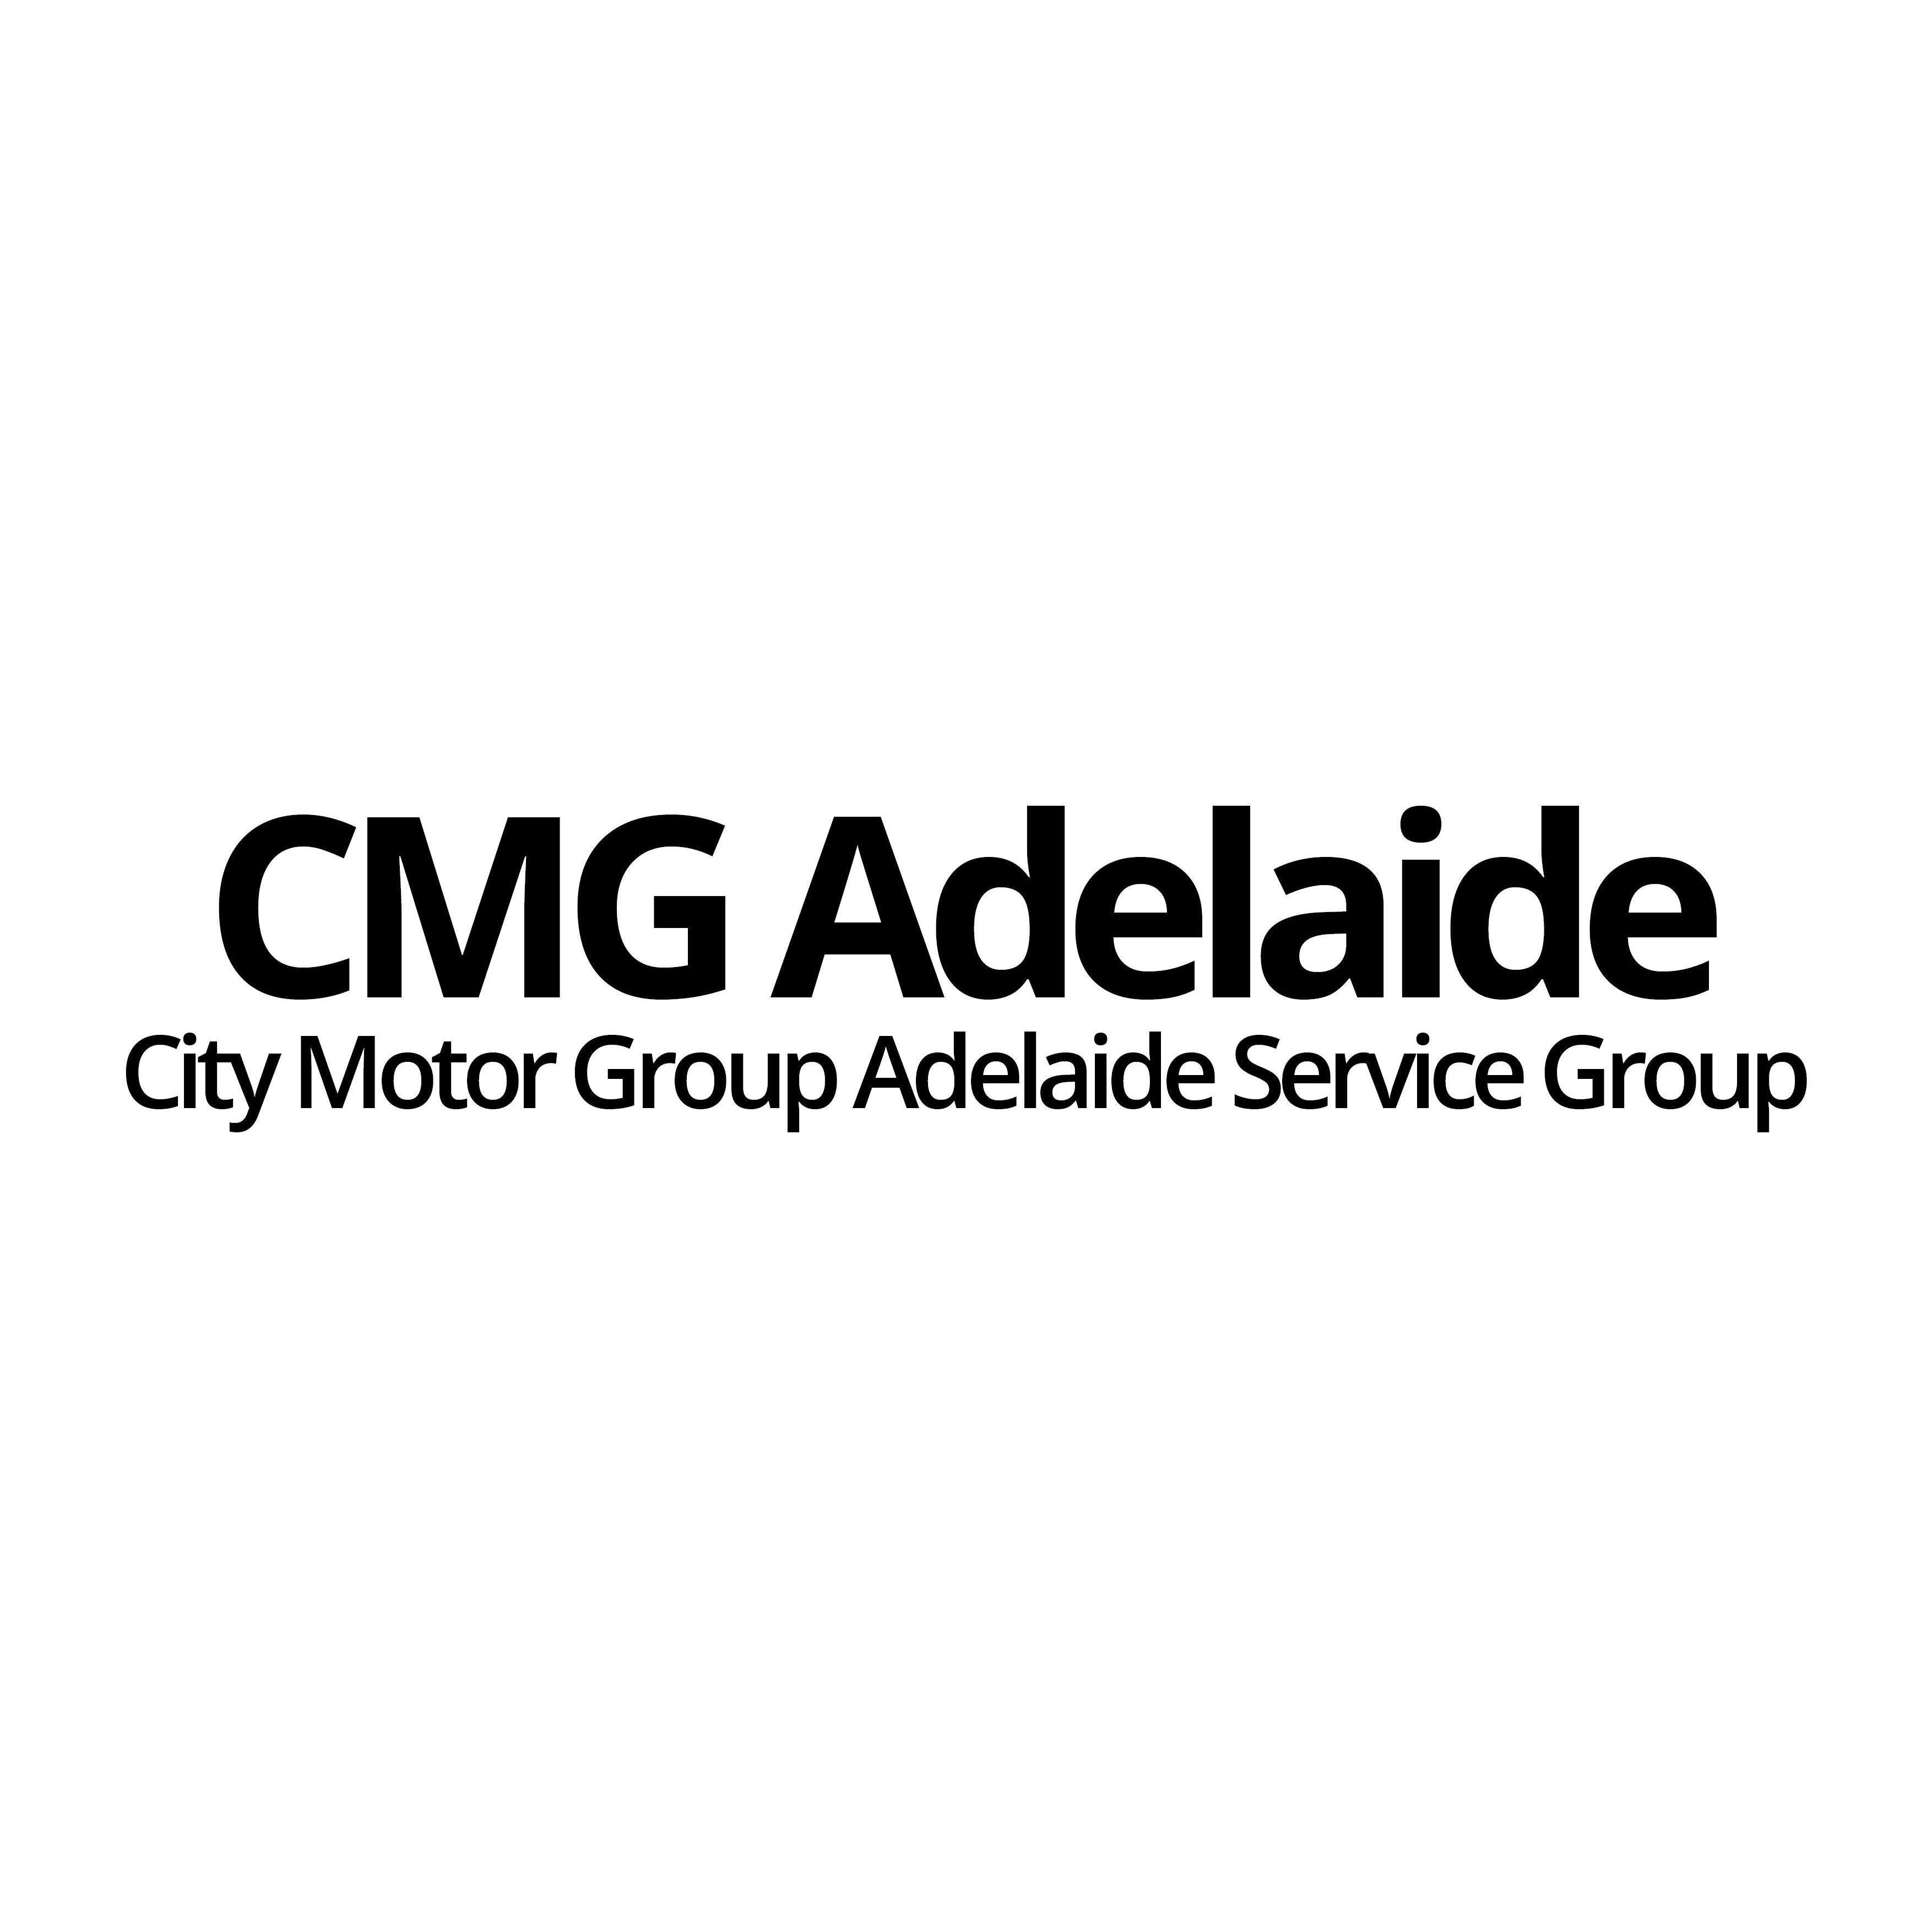 City Motor Group Adelaide - Main Service Department (Formally City Holden) Prospect